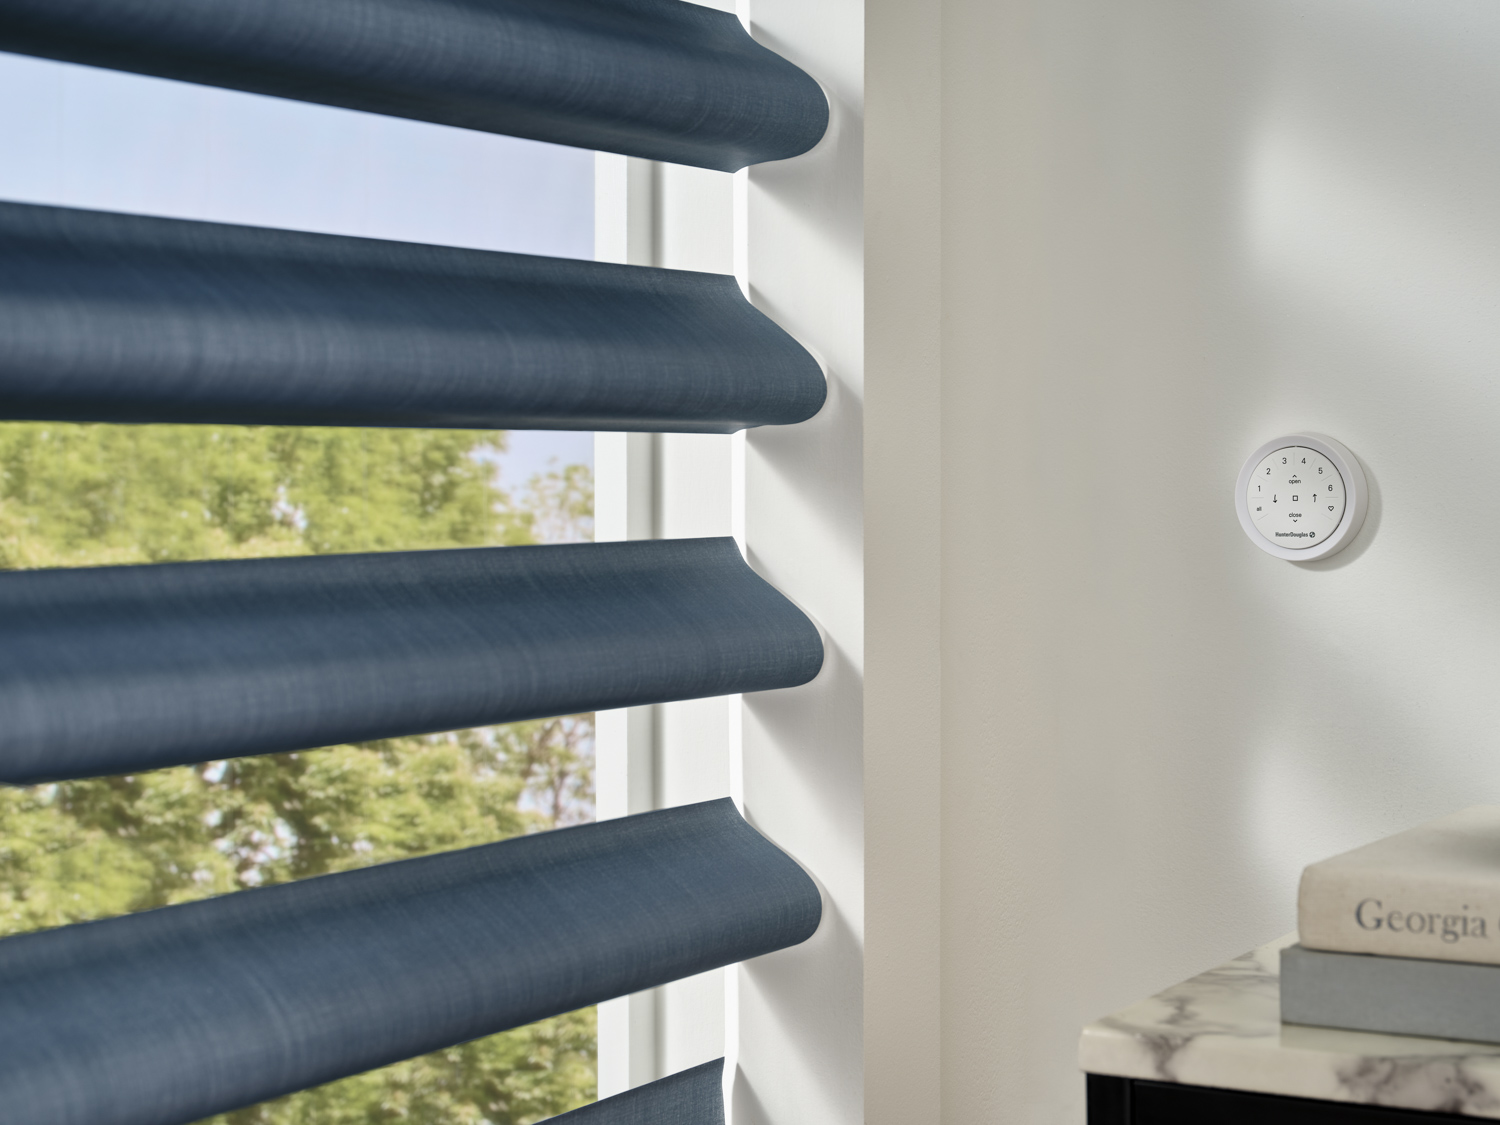 Hunter Douglas PowerView® Surface Remote mounted on a wall next to Hunter Douglas Pirouette® Sheer Shade.